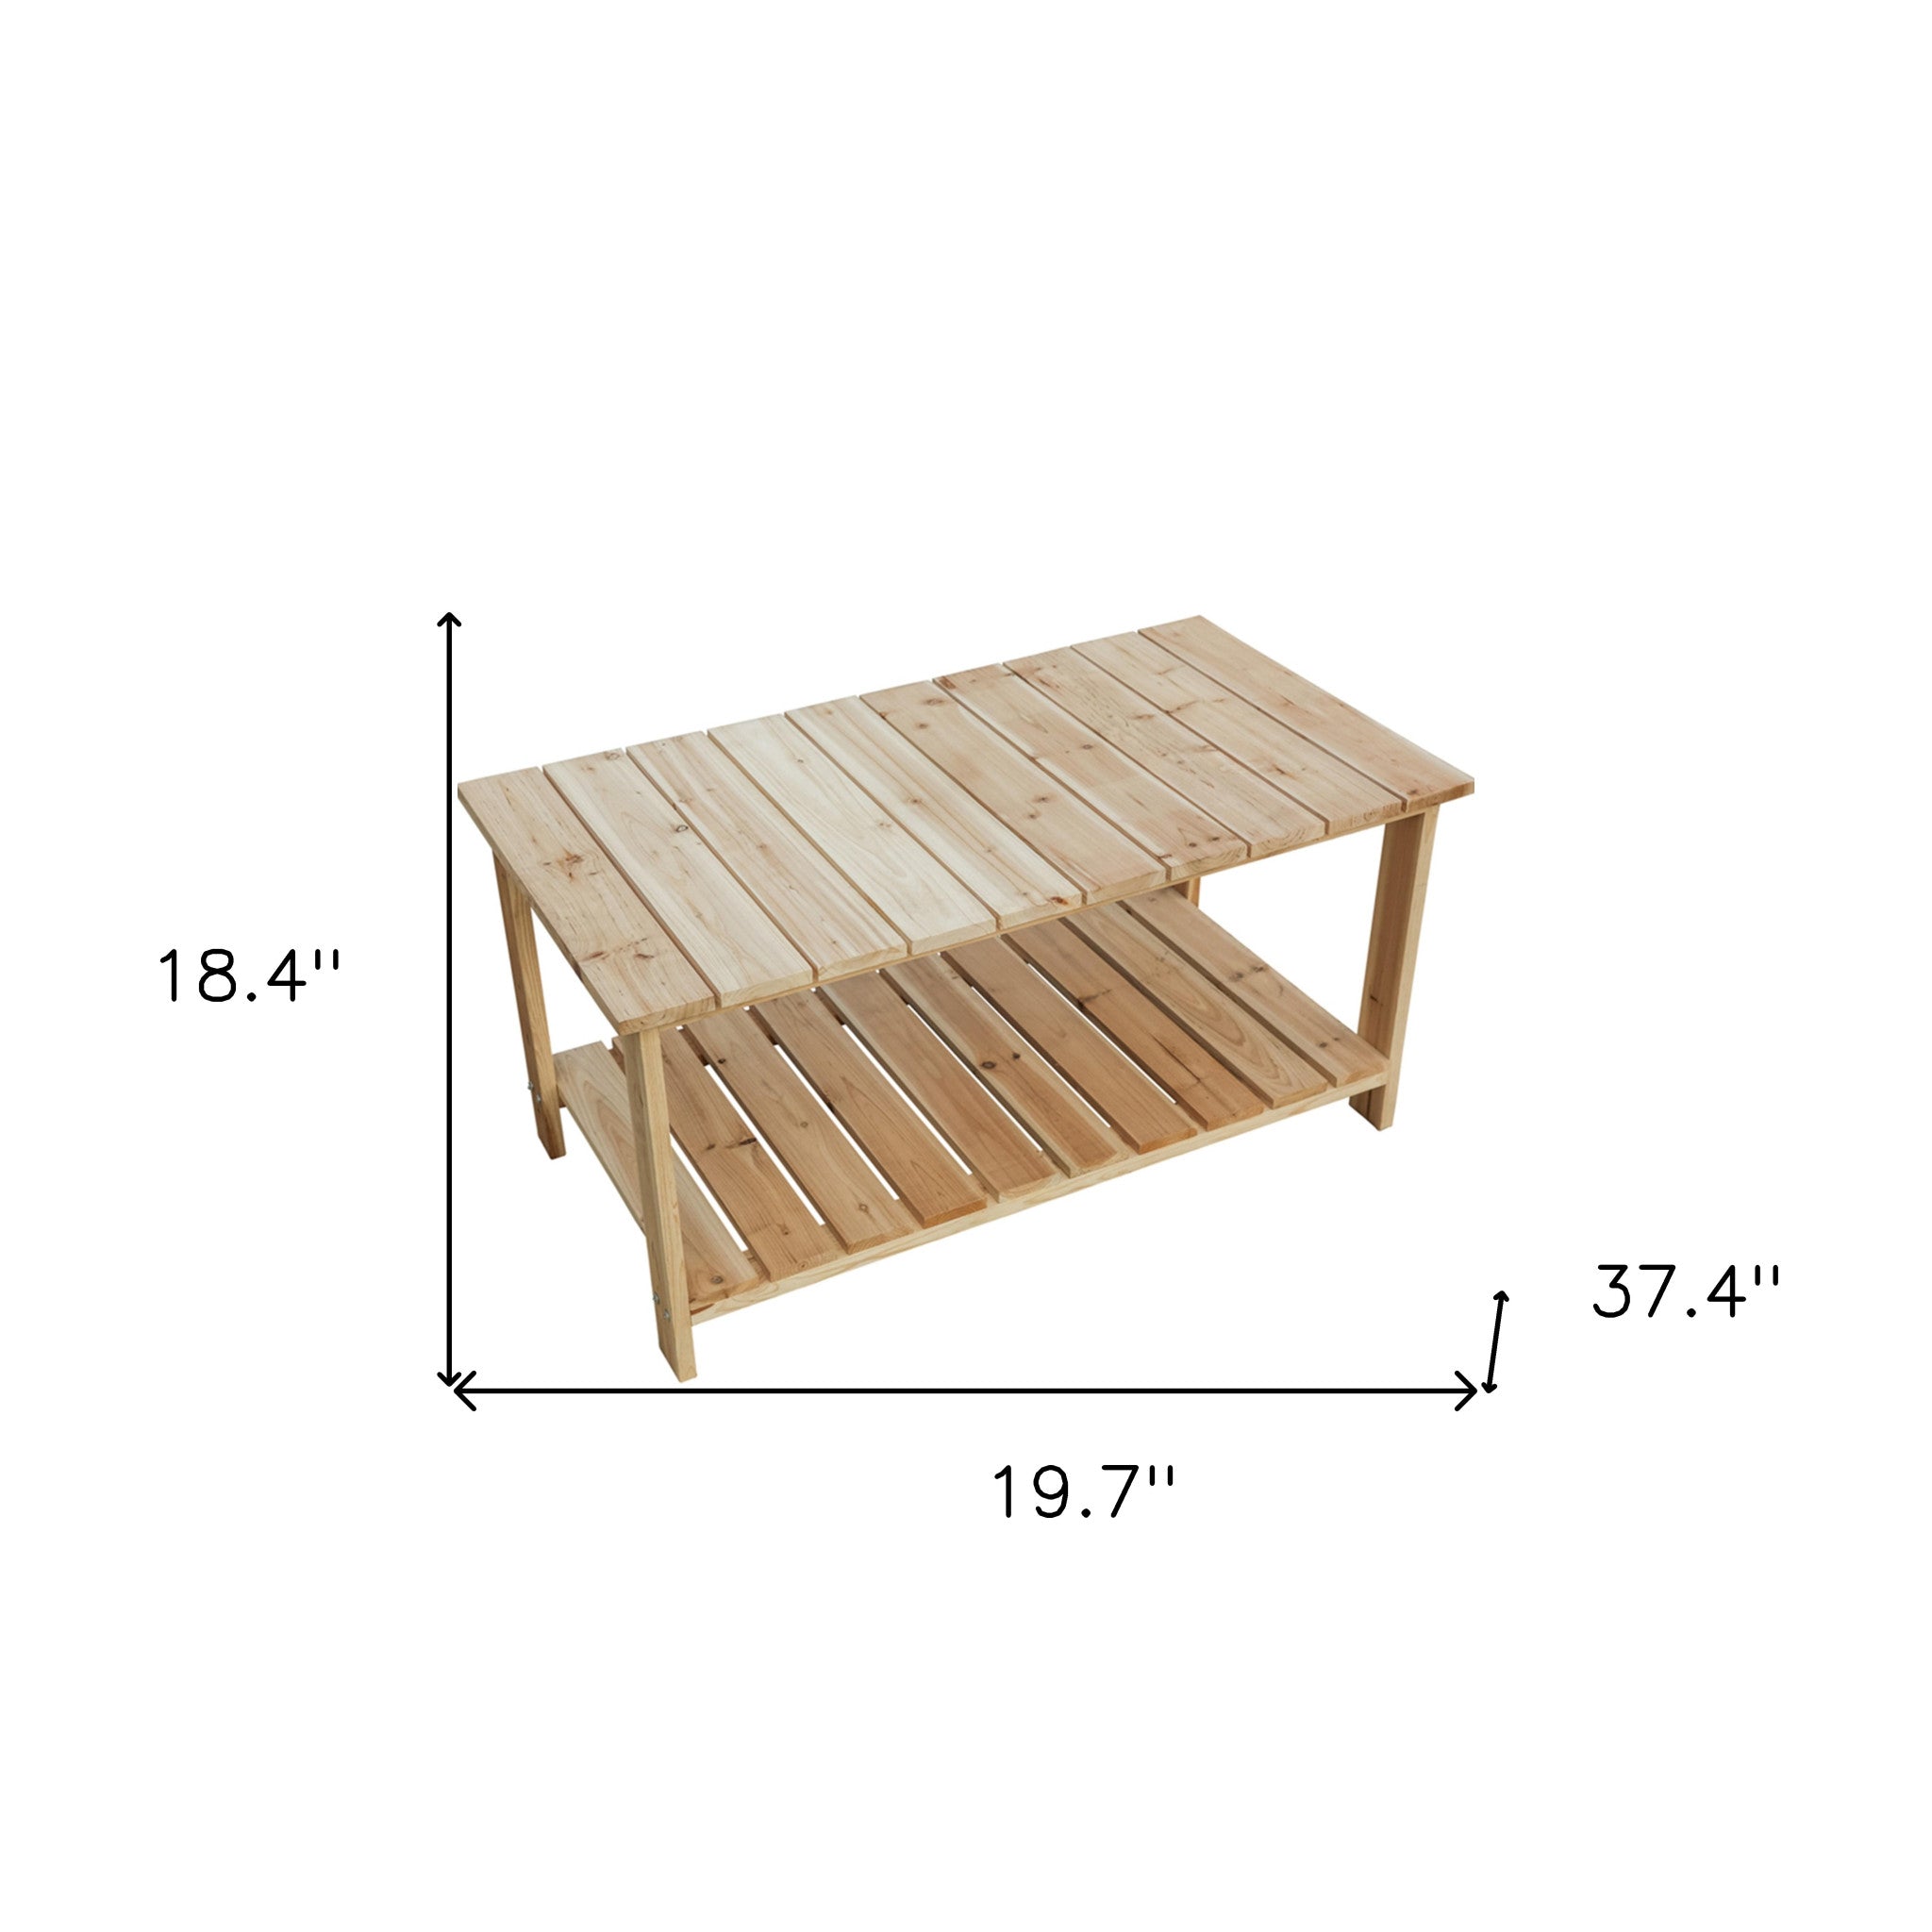 37" Natural Solid Wood Outdoor Coffee Table